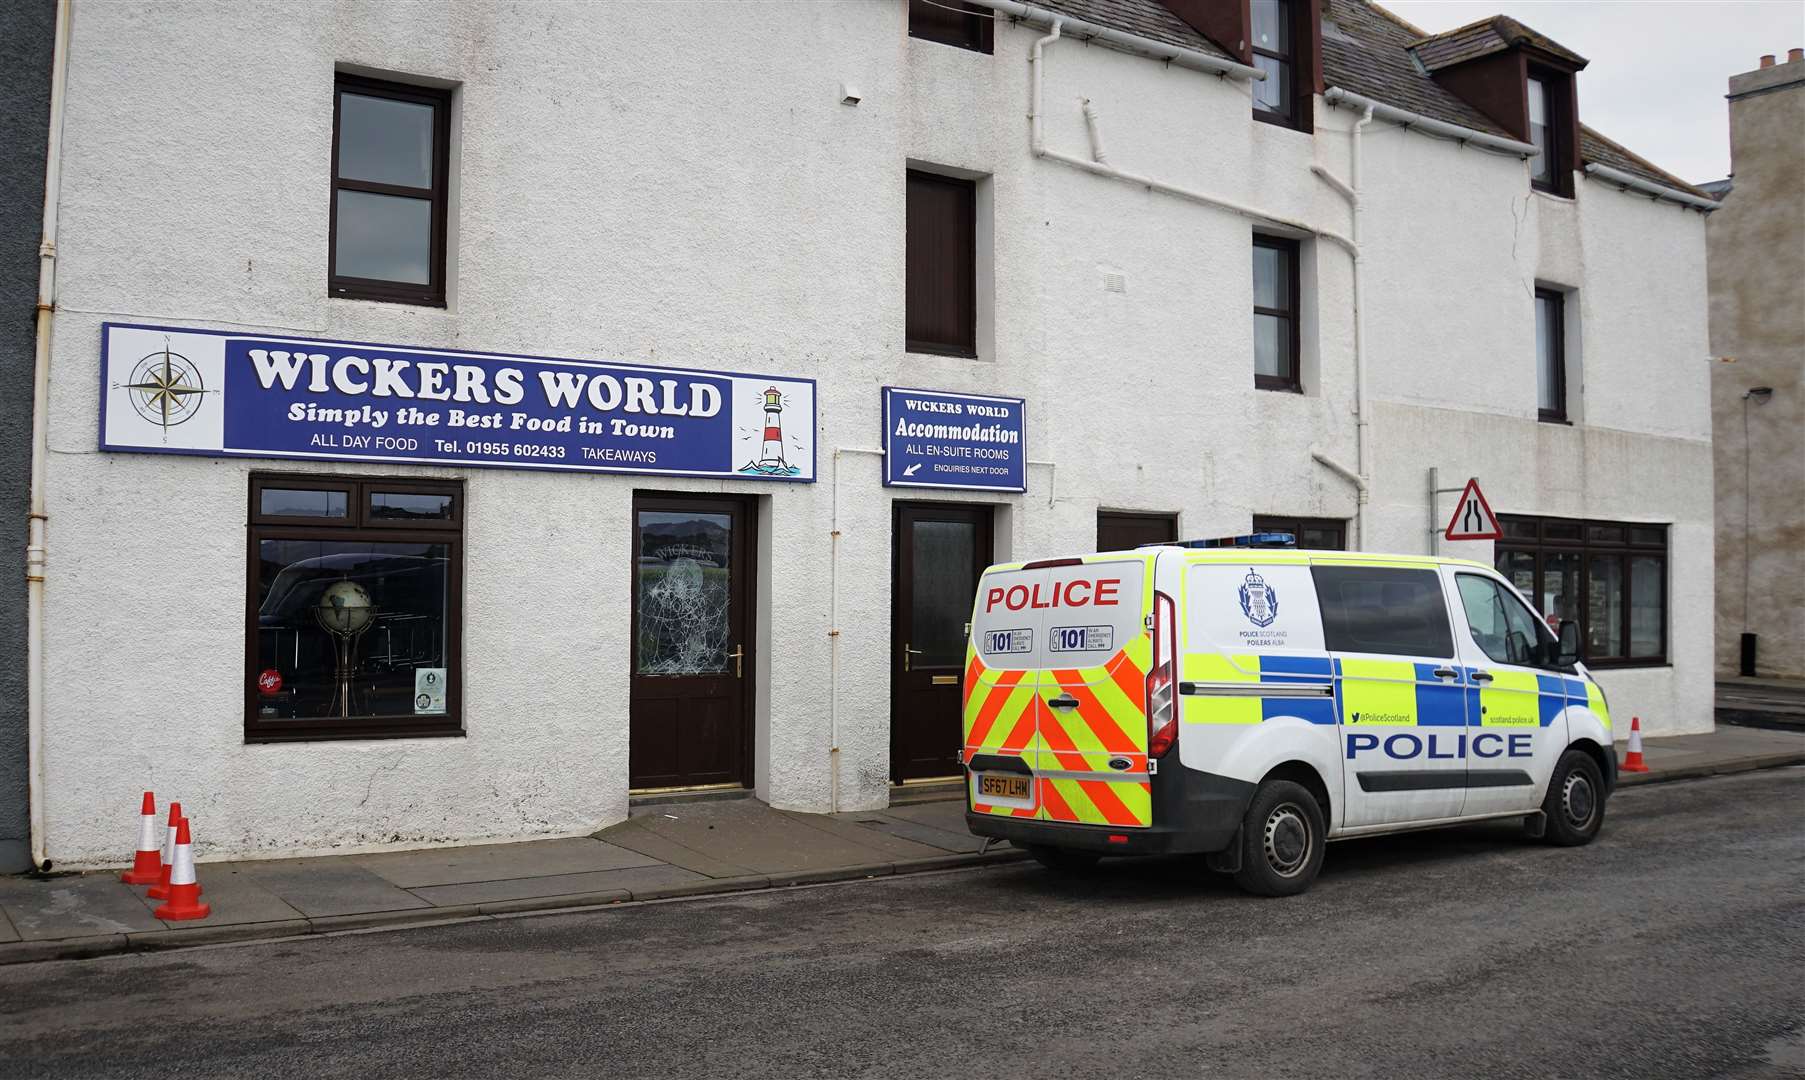 Police attending the scene of the break-in at Wicker's World at 9am on Friday, March 13. Pictures: DGS